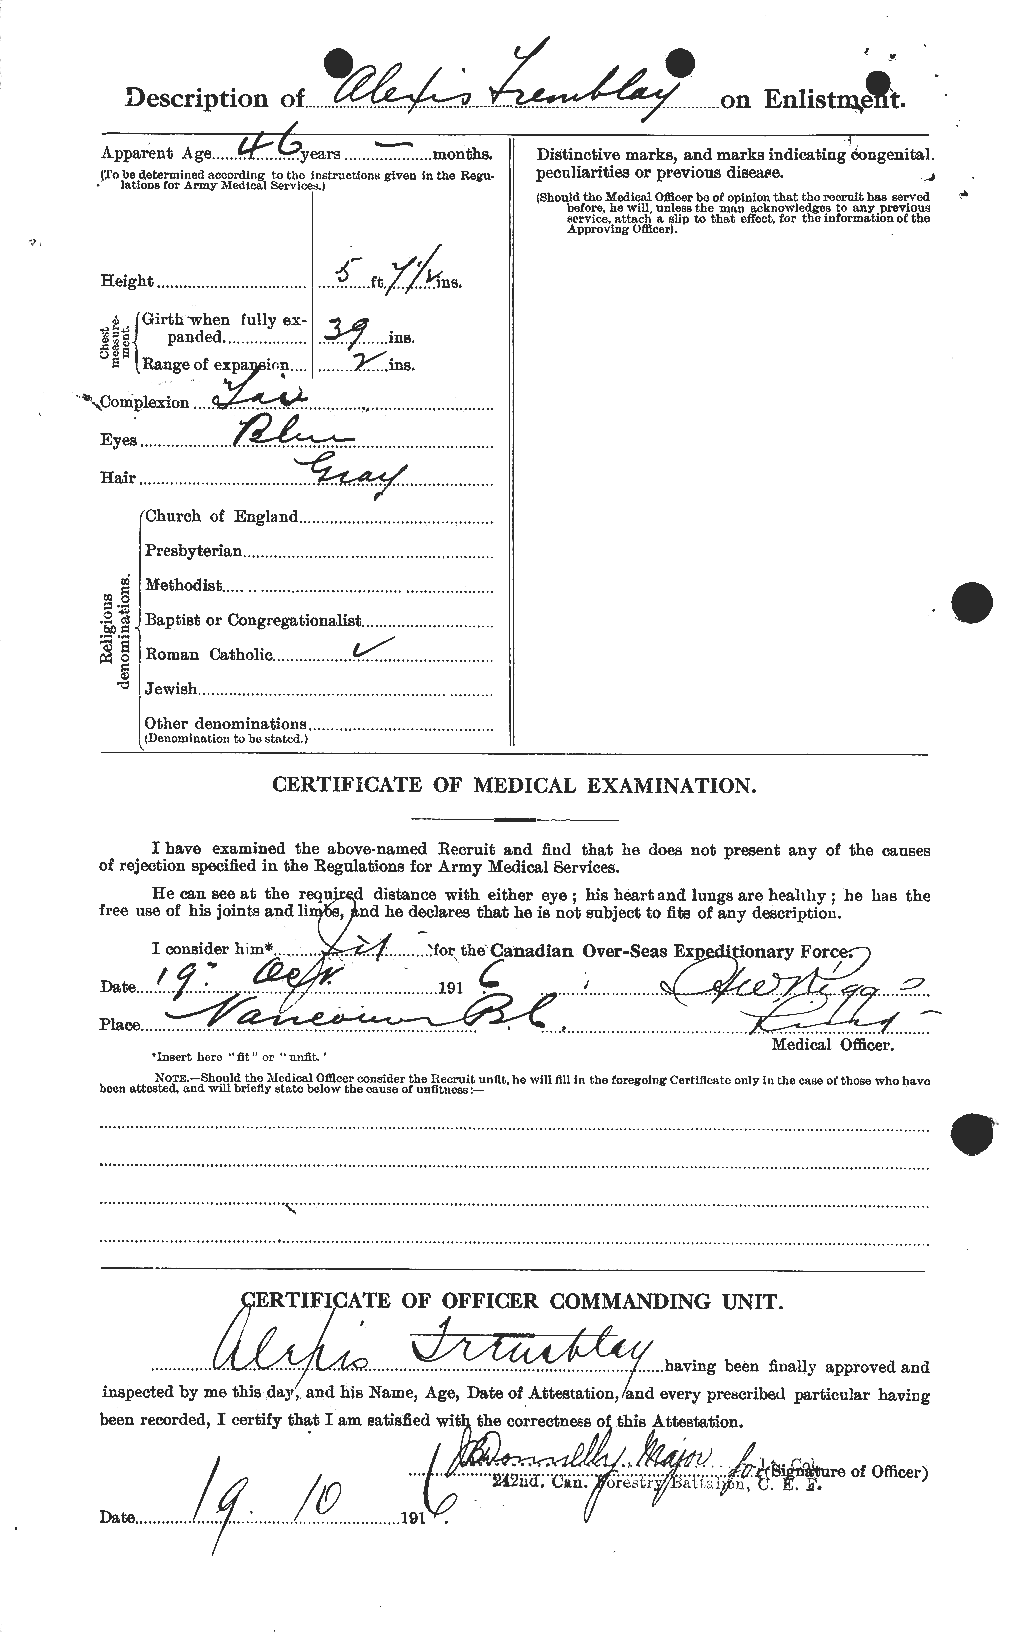 Personnel Records of the First World War - CEF 638911b